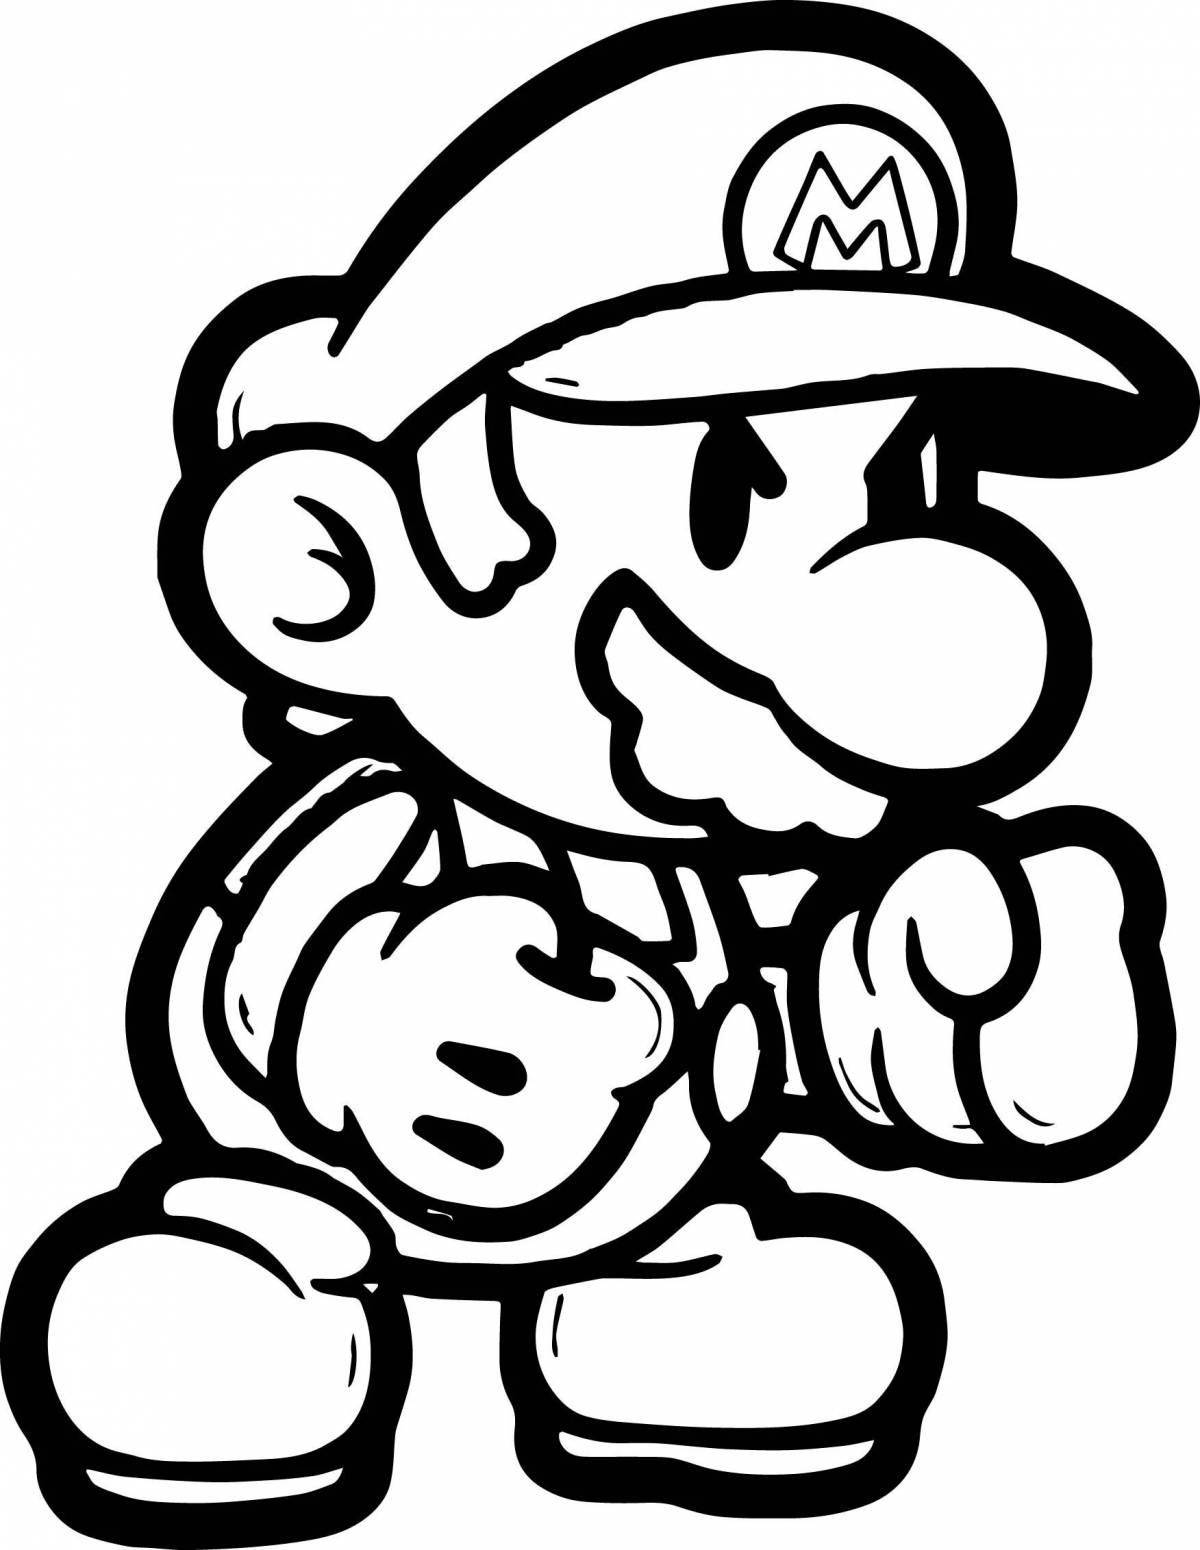 Funny mario coloring book for kids